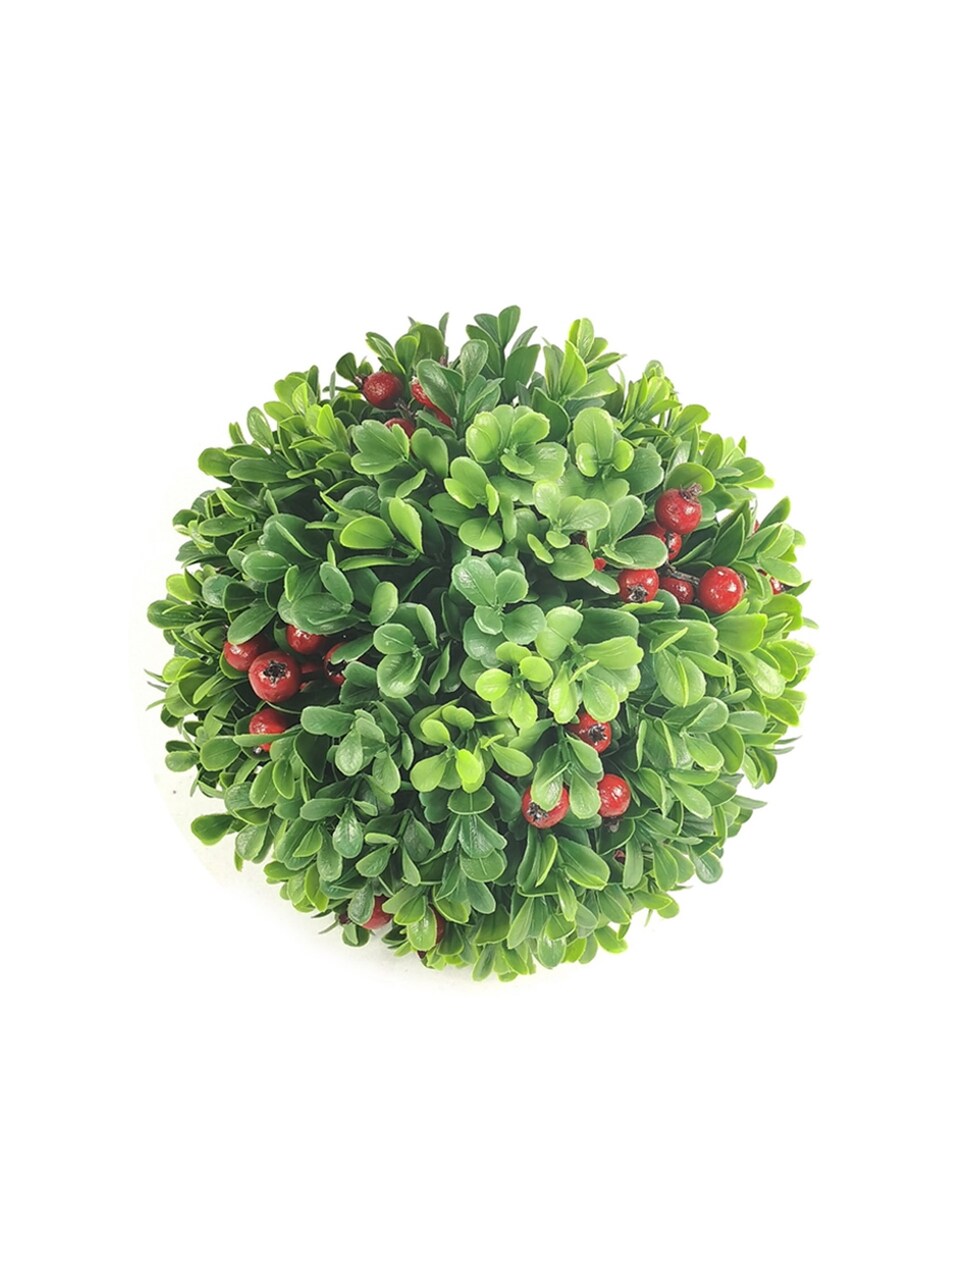 Set of 12: Green Boxwood Ball with Lifelike Red Berries, 7 Wide, UV  Resistant, Indoor/Outdoor Use, Faux Greenery, Home & Office Decor